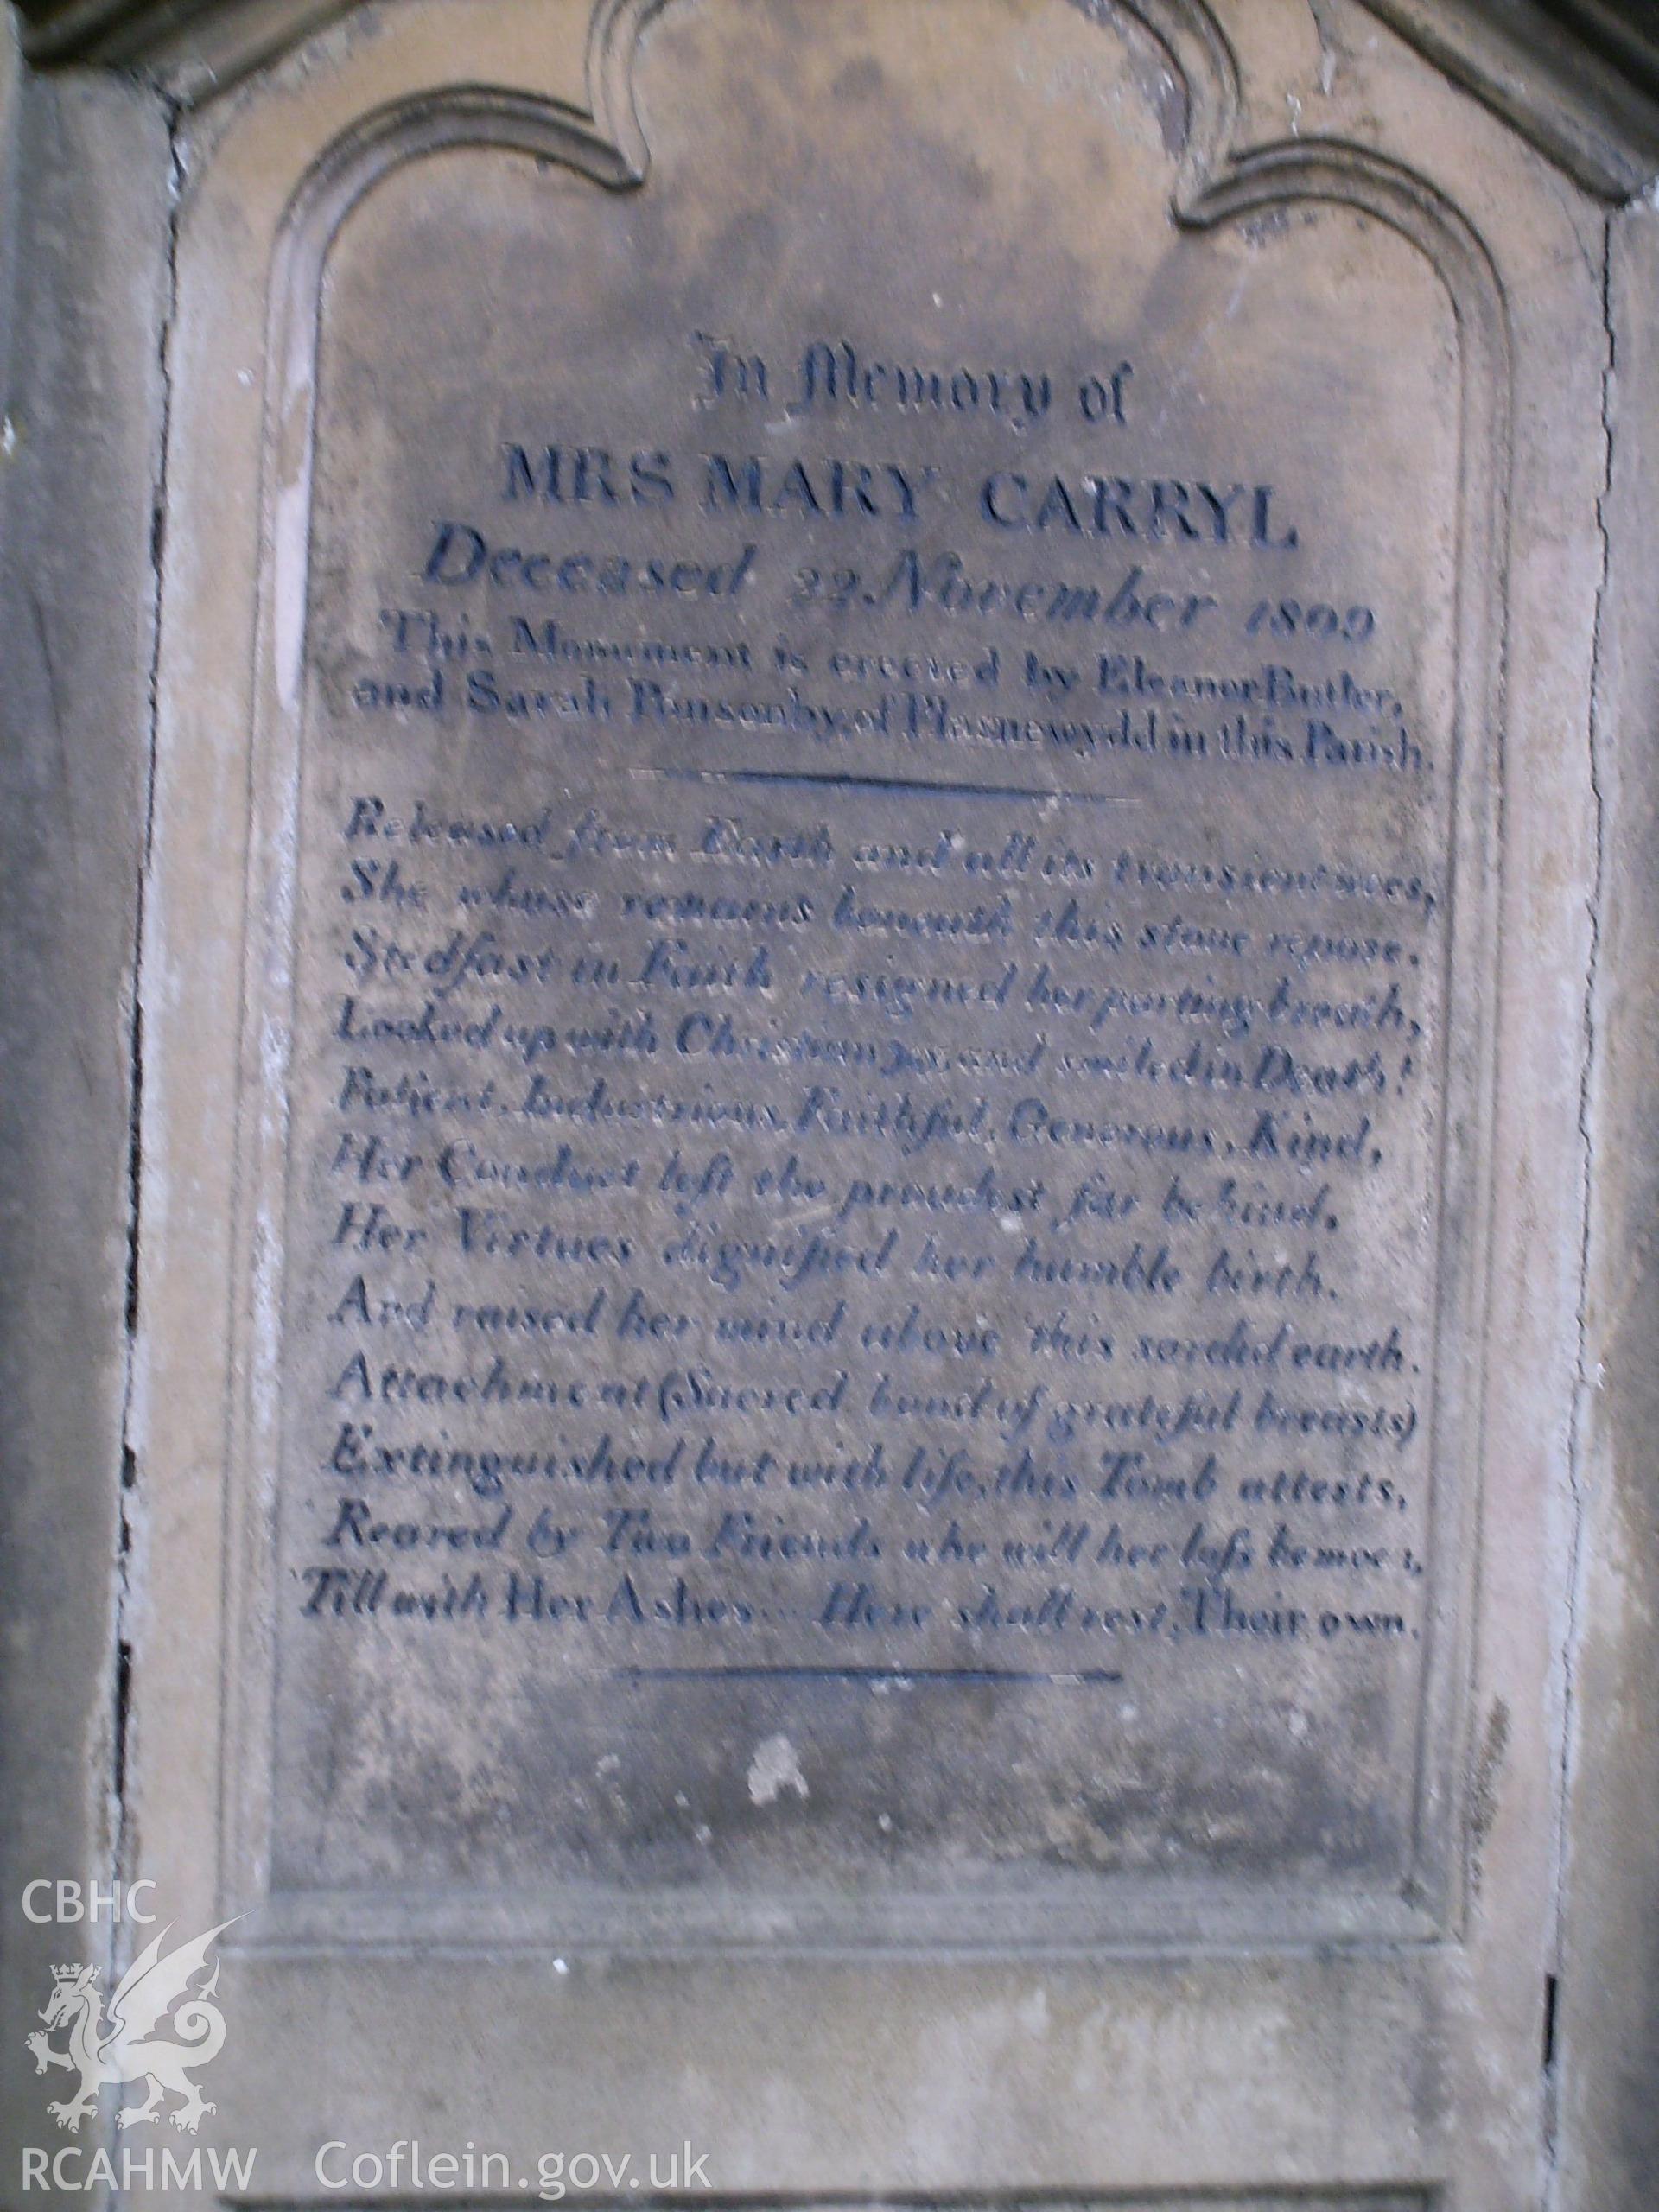 Digital image showing the memorial plaque to Mary Carryl pre-restoration.